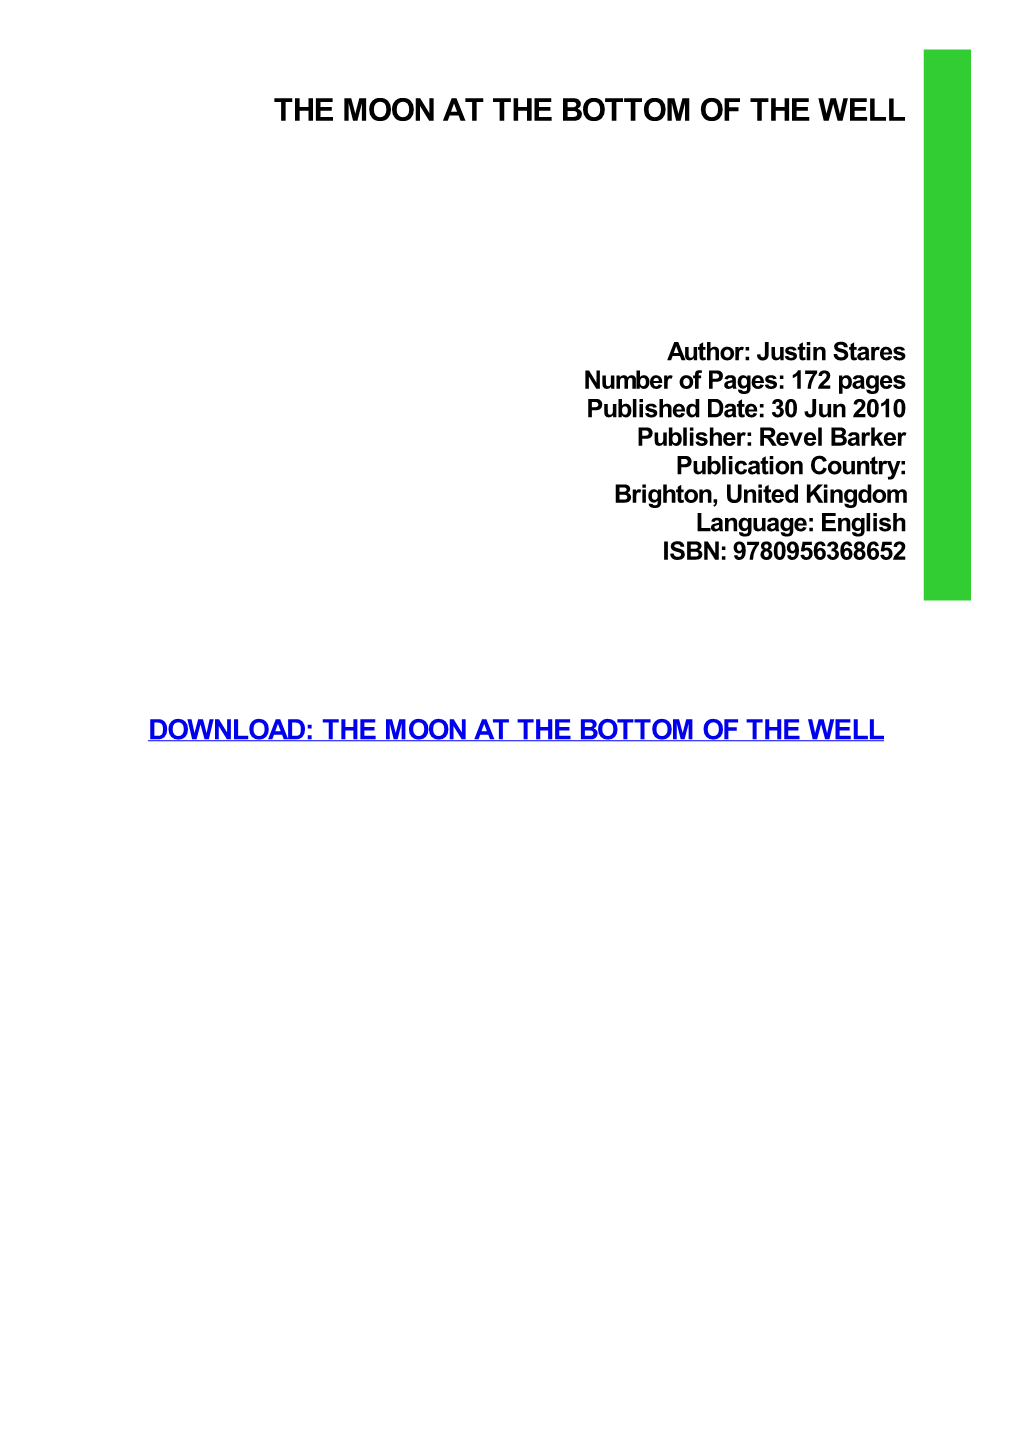 The Moon at the Bottom of the Well Download Free